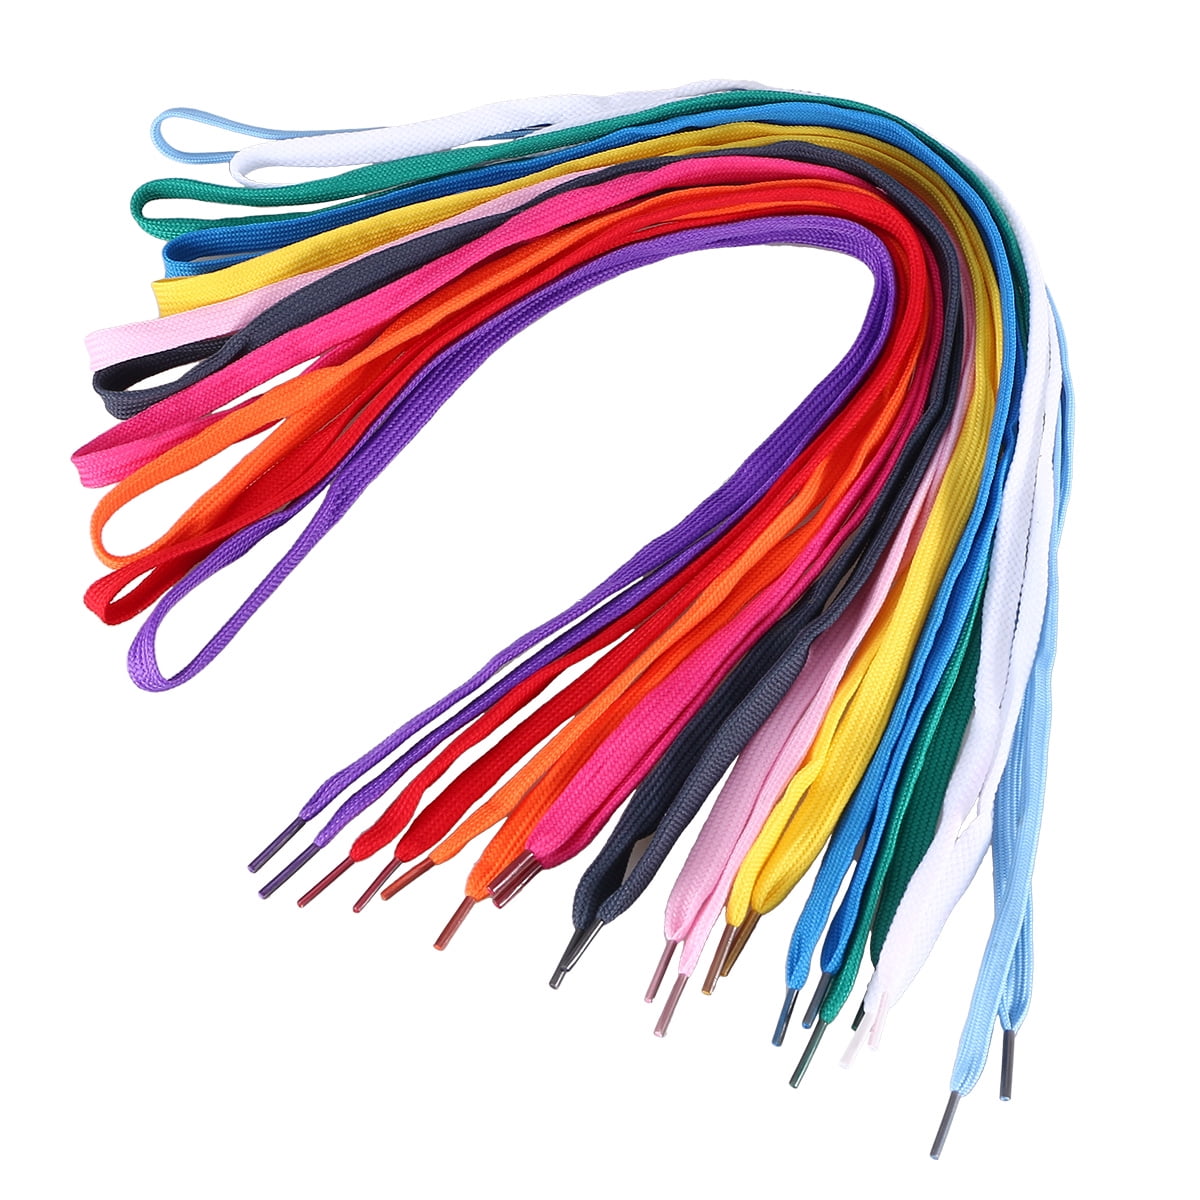 15 pairs of flat shoelaces in assorted vibrant colors 45 inch free shipping USA 